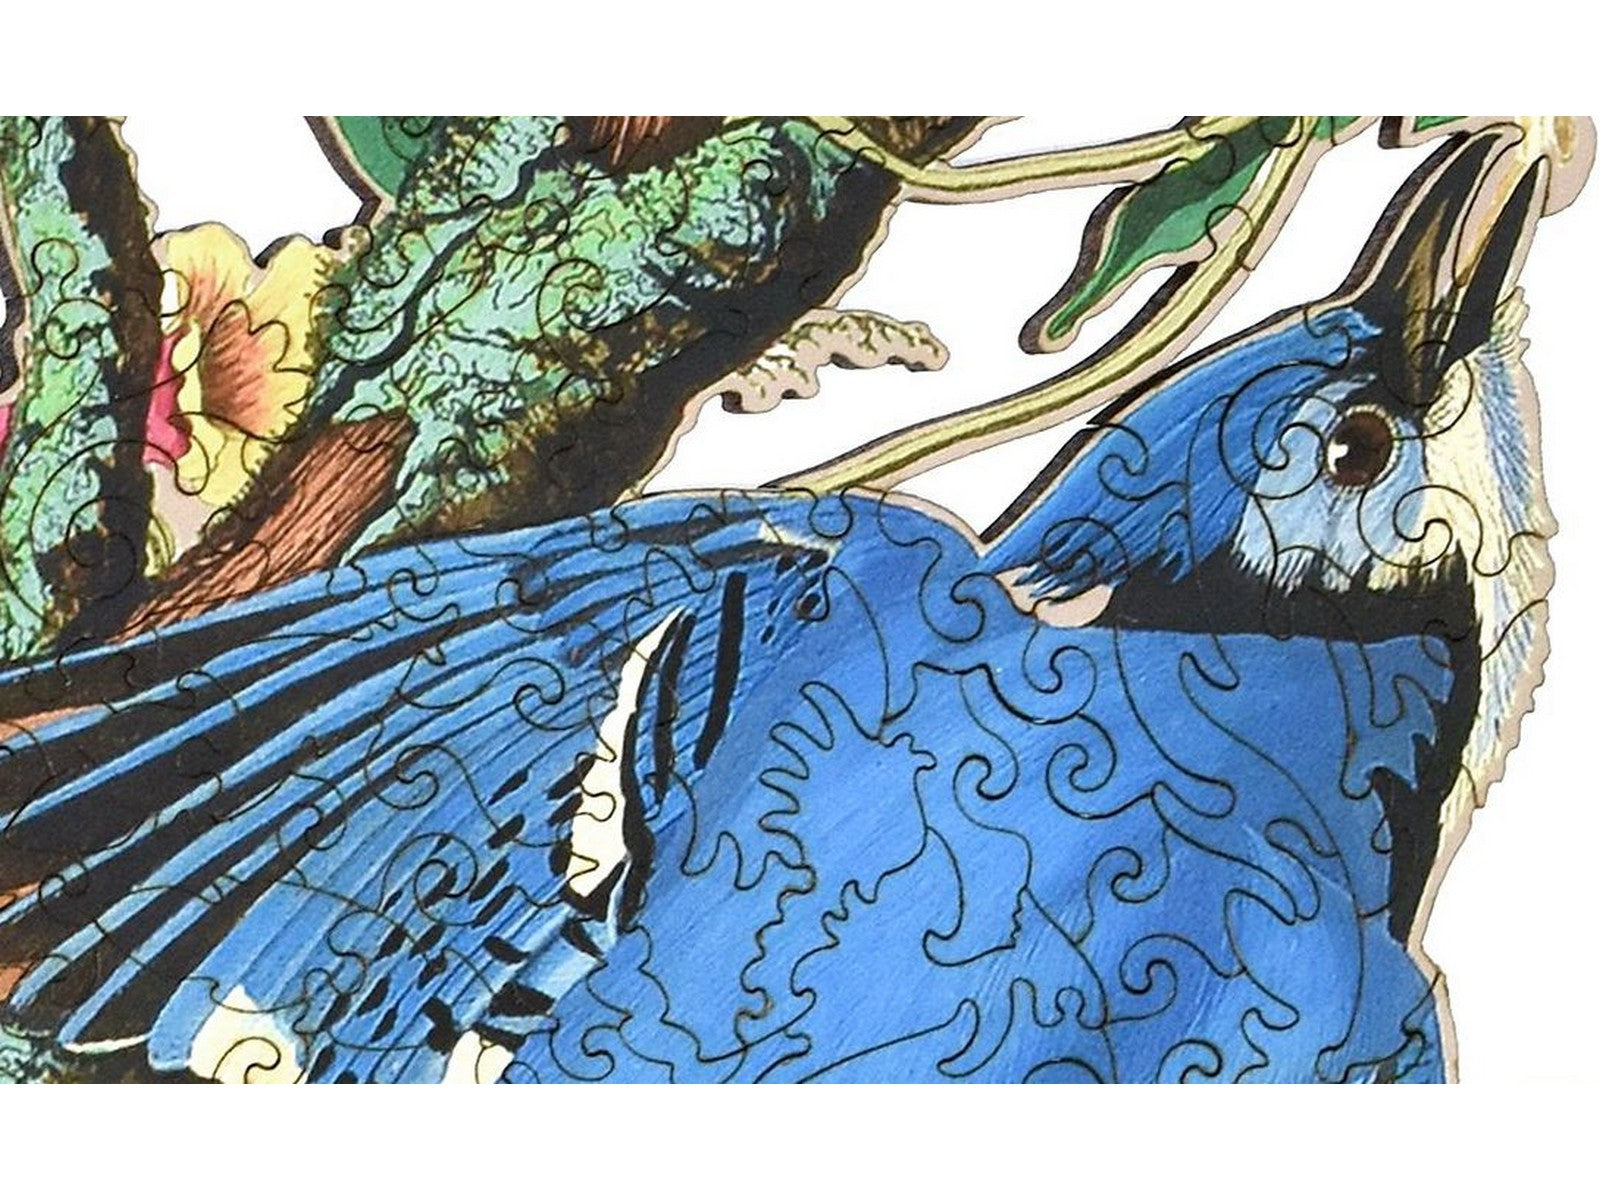 A closeup of the front of the puzzle, Blue Jay, showing the detail in the pieces.